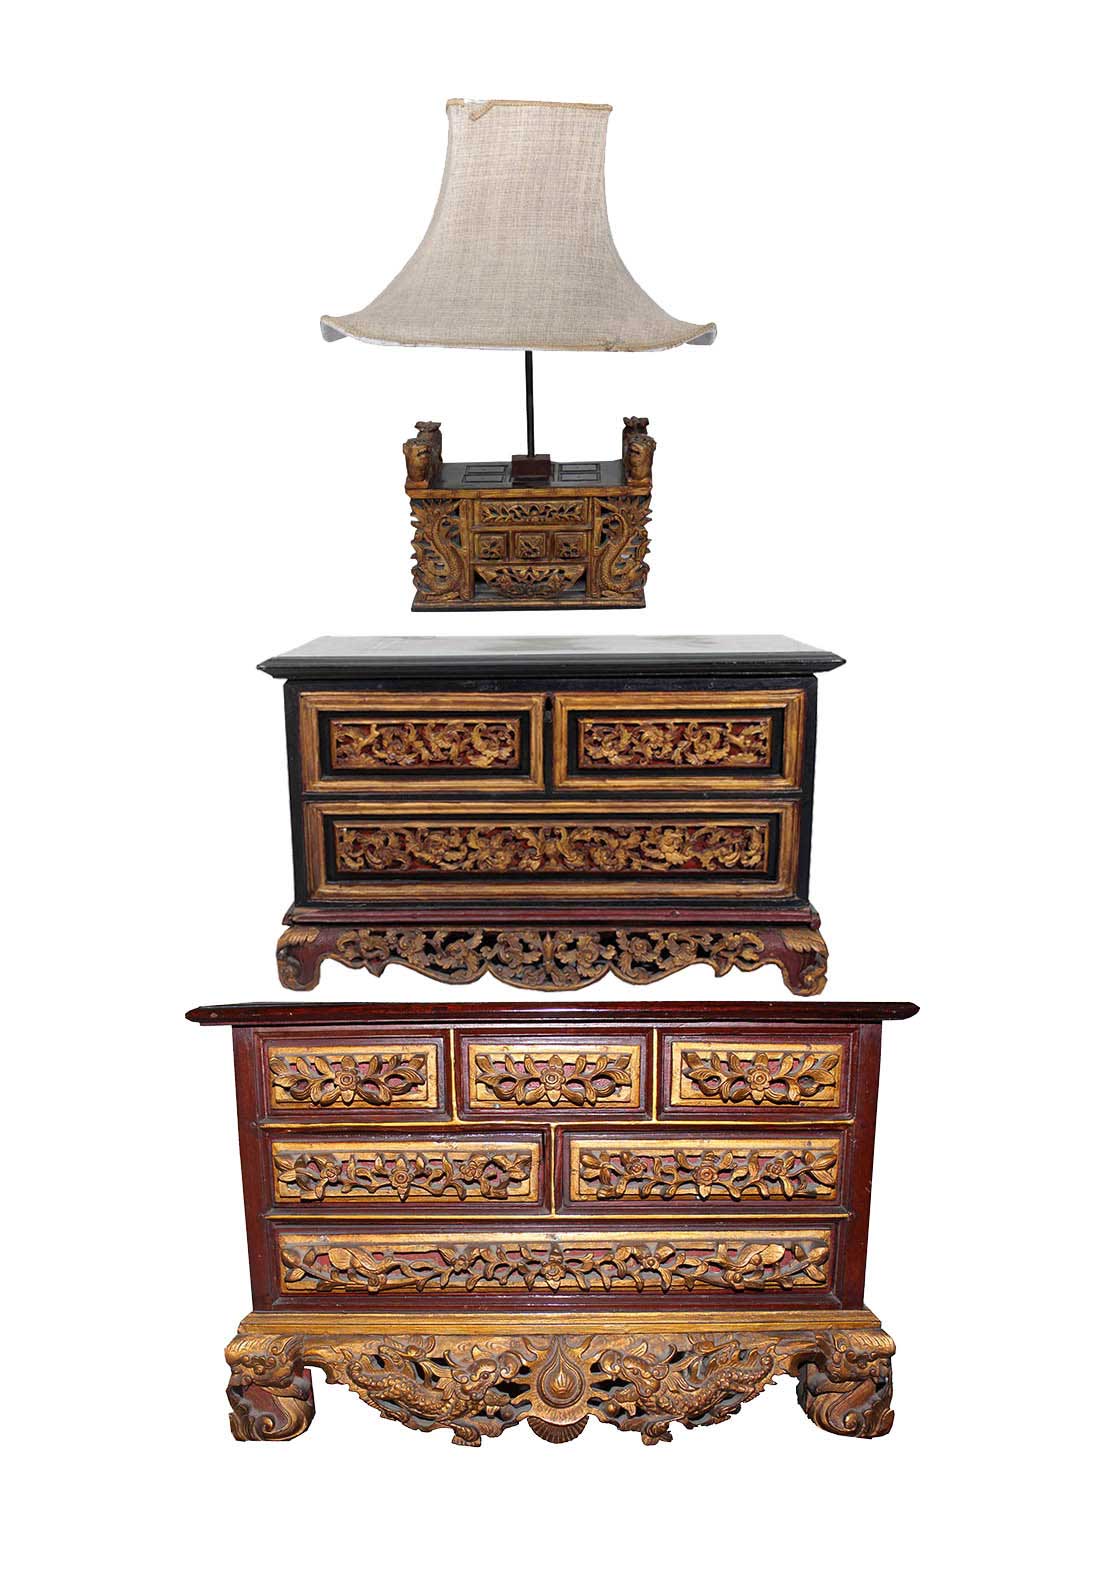 A set of three wooden brown gilt chest multi-drawers brown and gold botekan chest